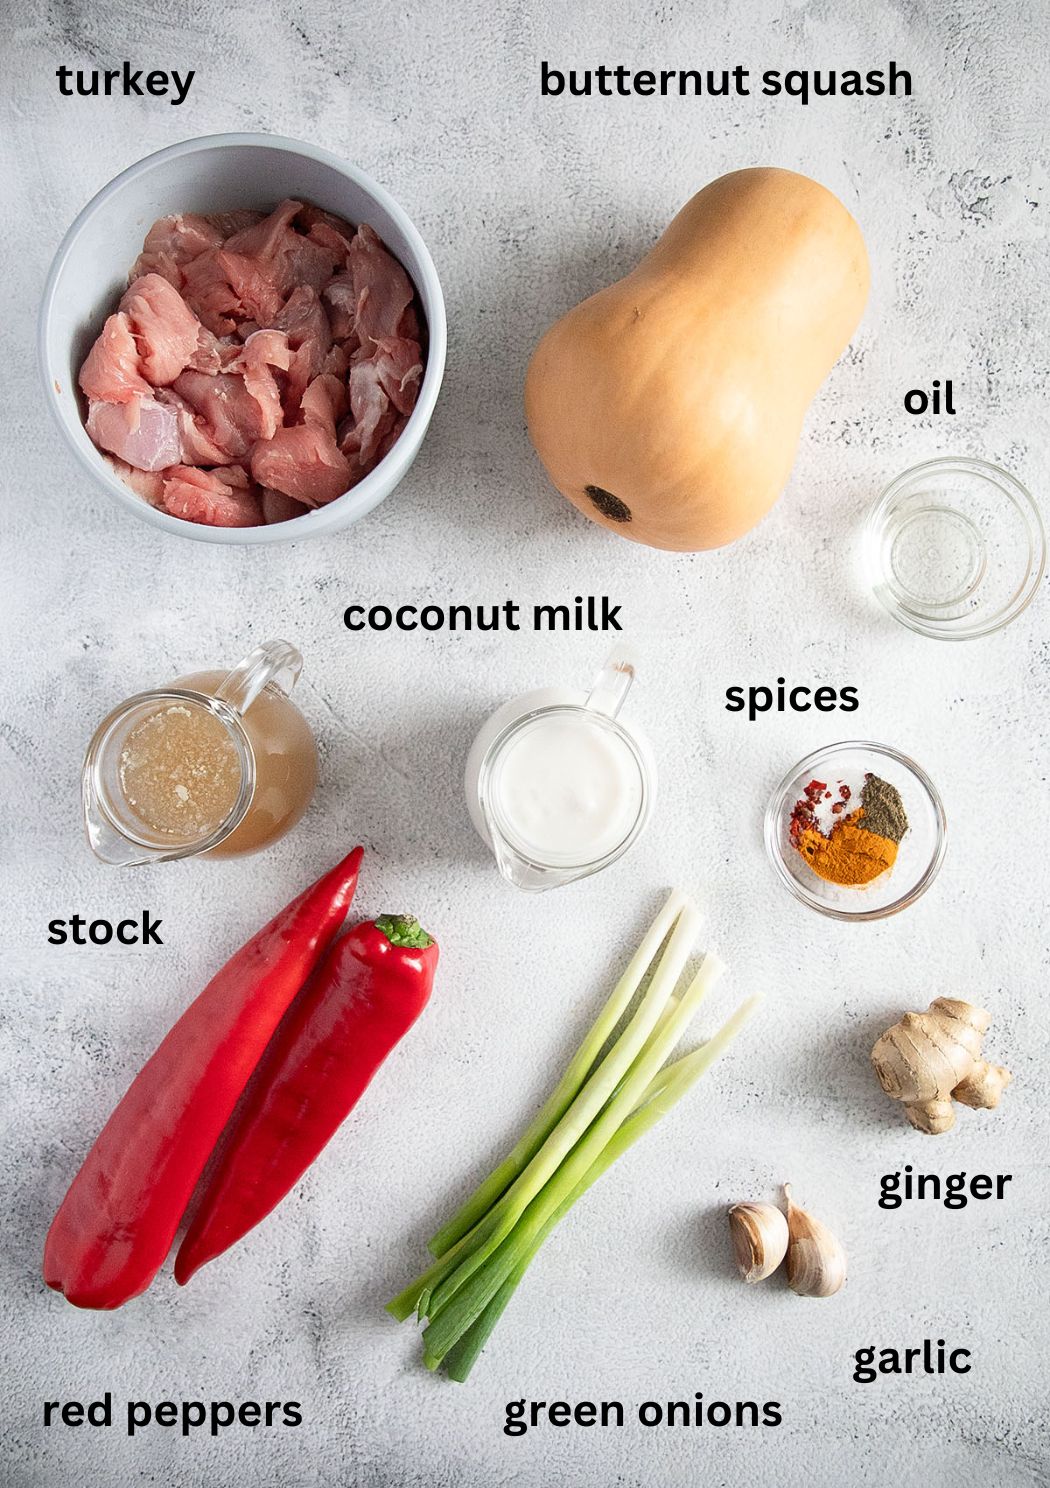 listed ingredients for making curry with turkey meat, coconut milk, peppers and squash.